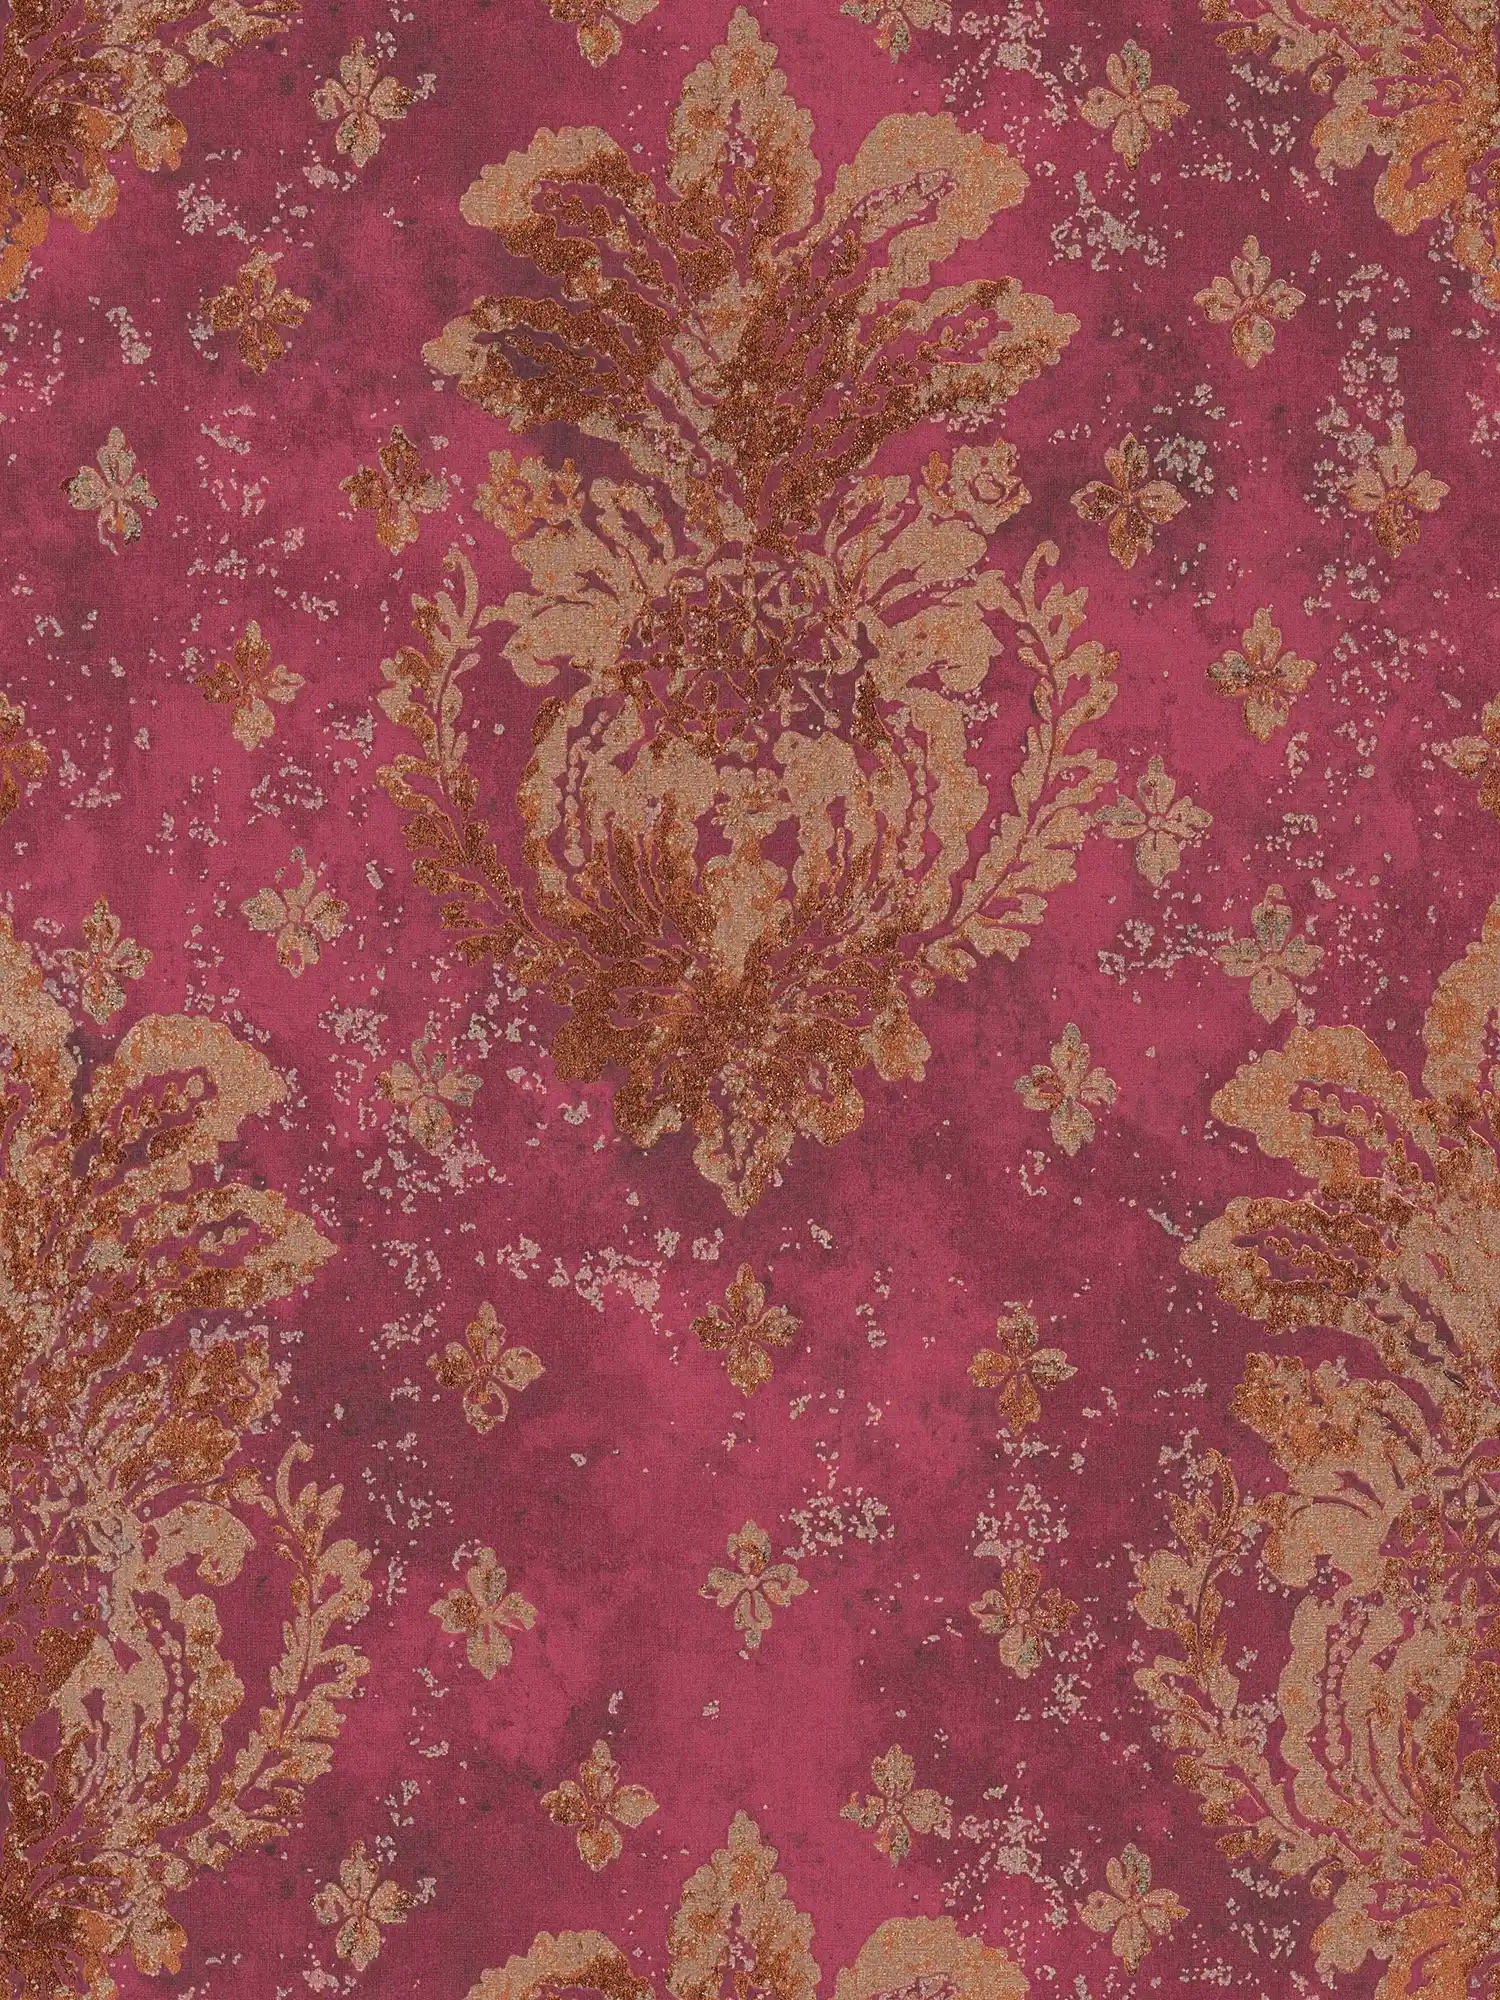 Wine red wallpaper with ornaments in boho style - metallic, red
